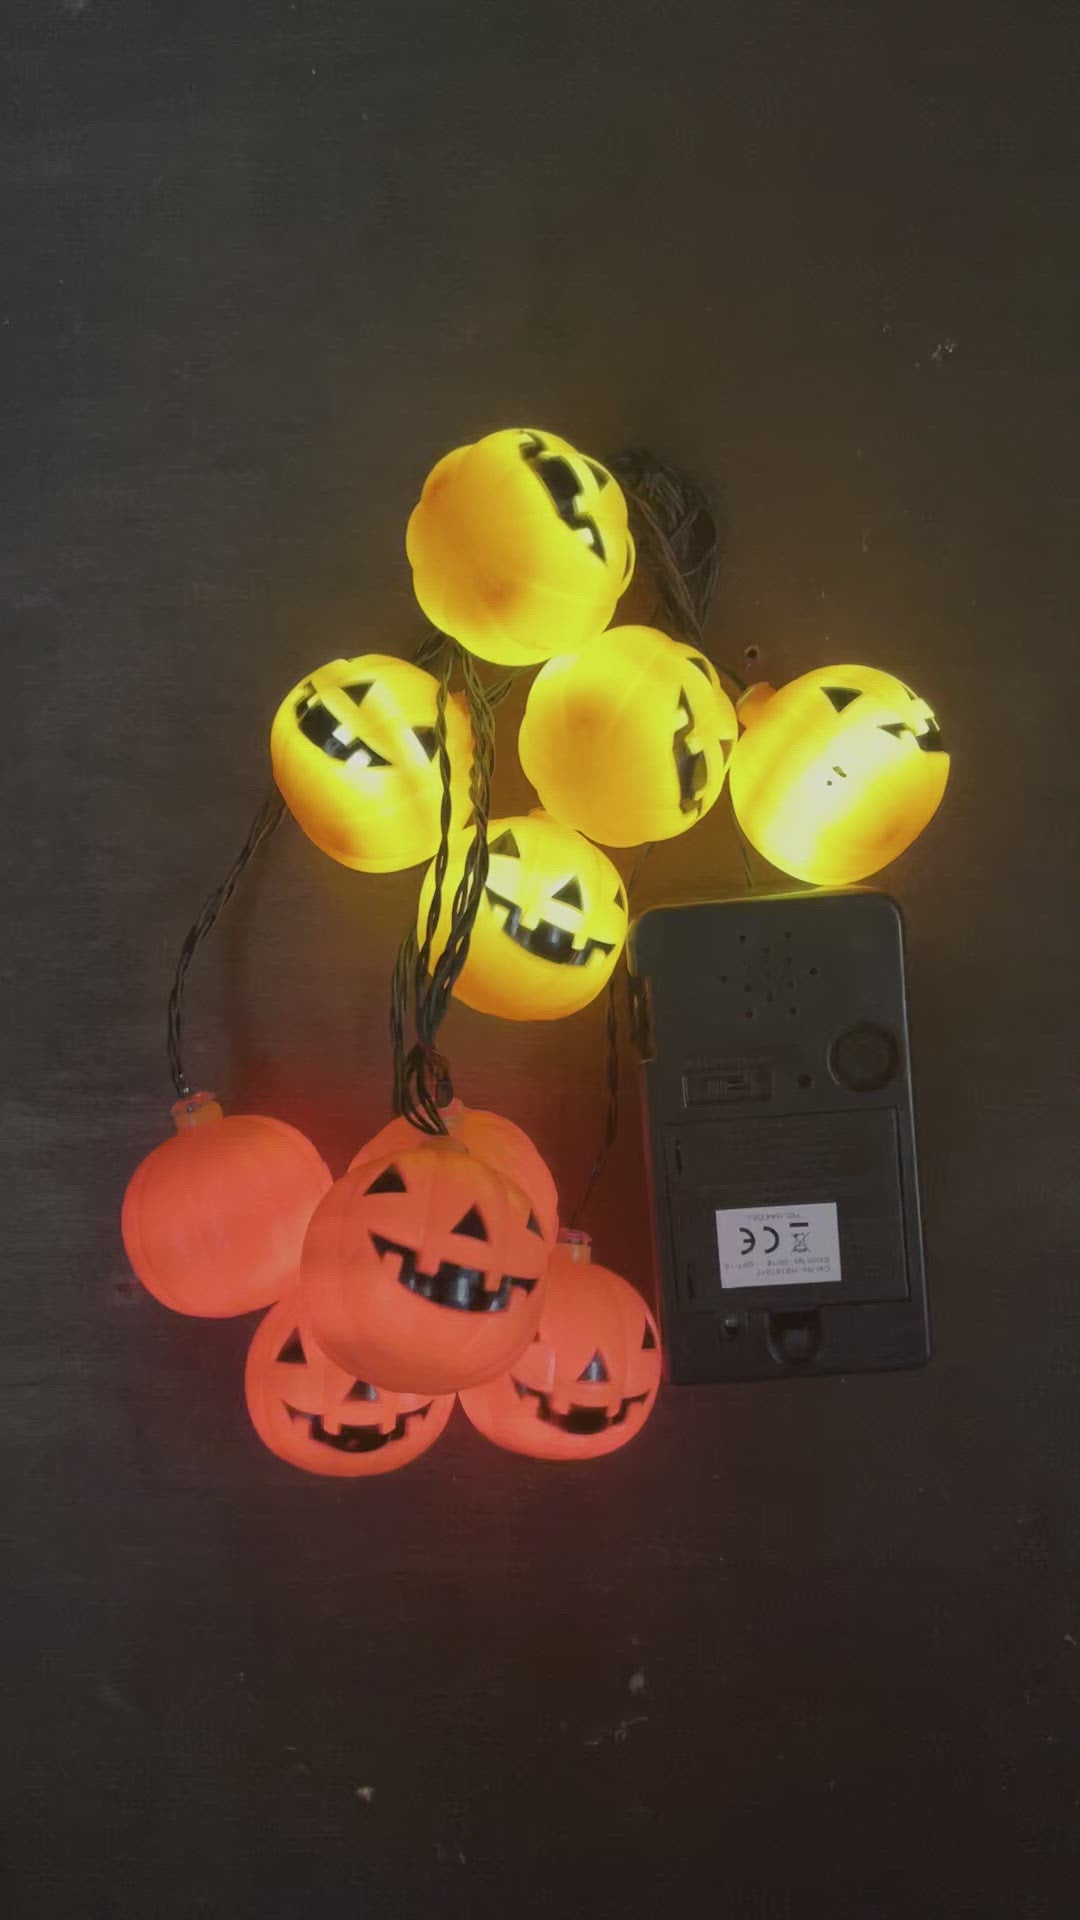 video of the pumpkin lights with flashing LED's and making a spooky noise